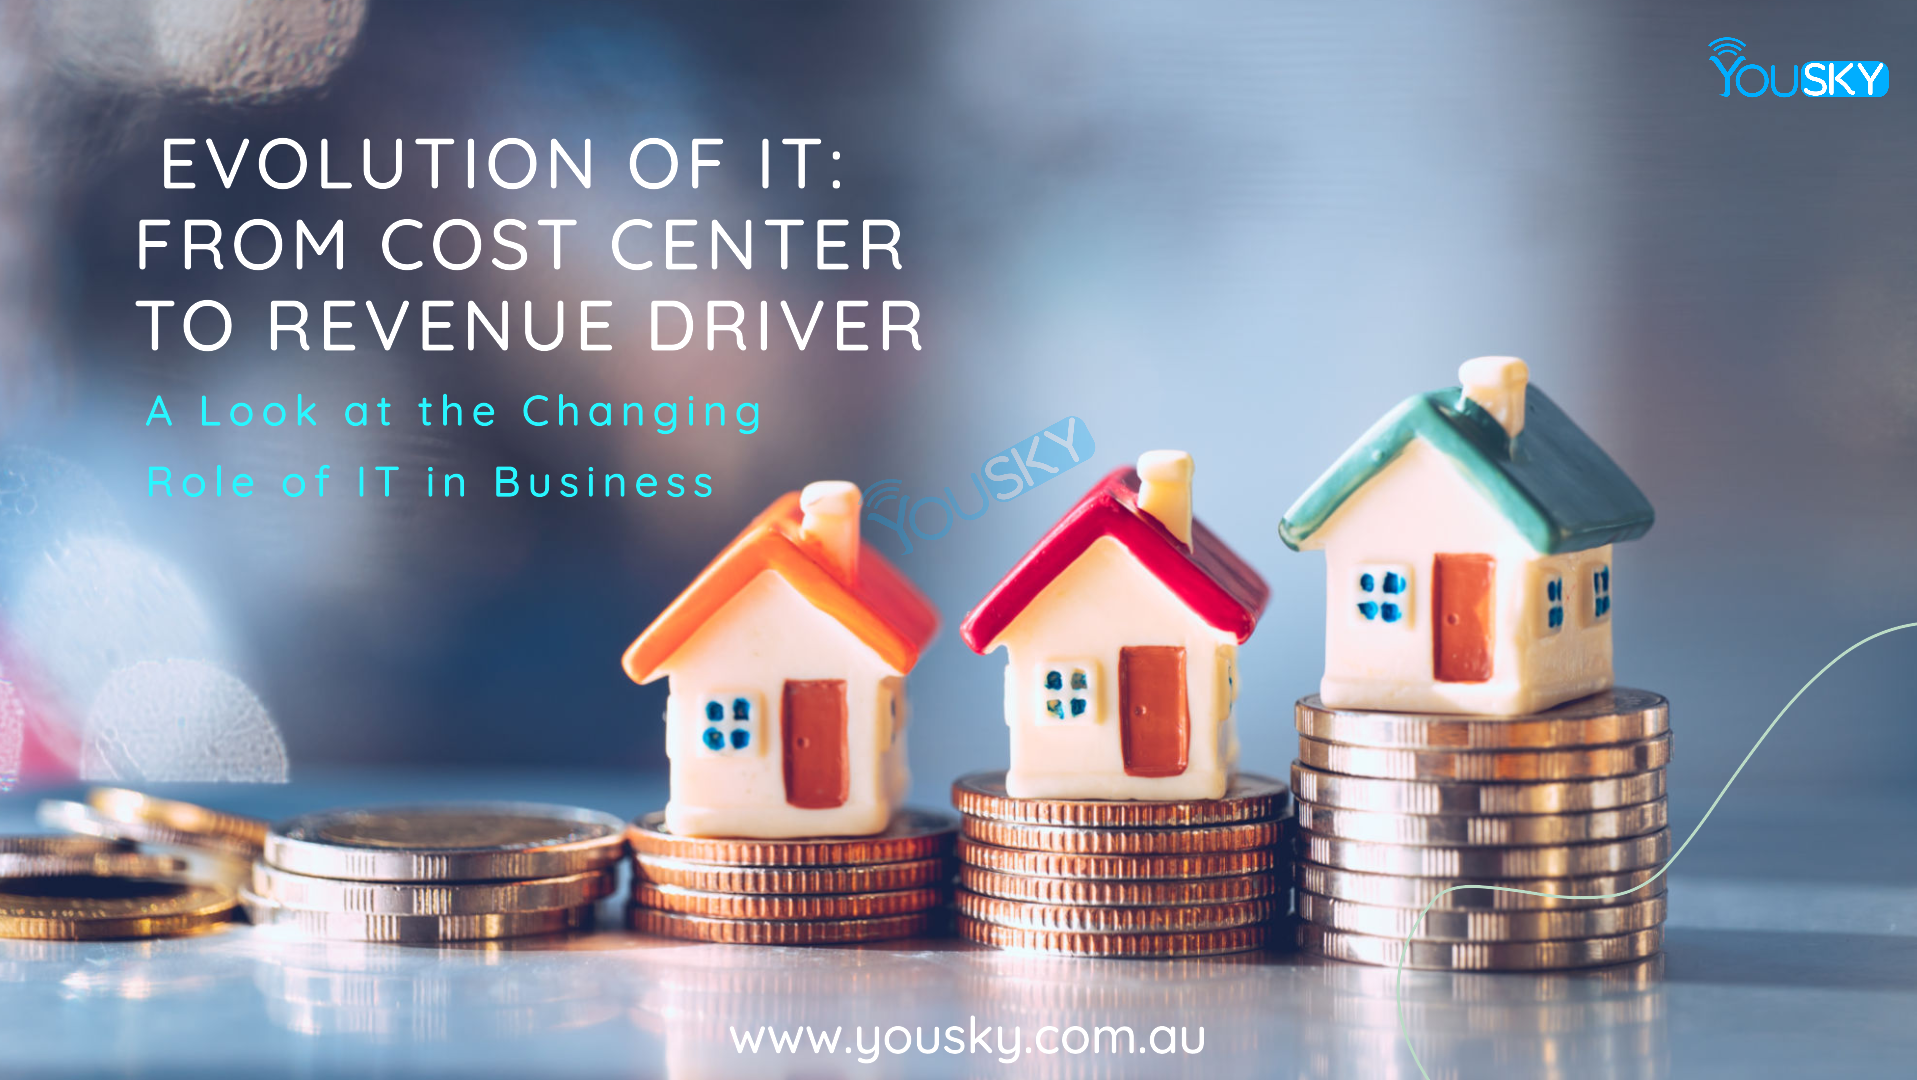 The Evolution of IT from Cost Center to Revenue Driver